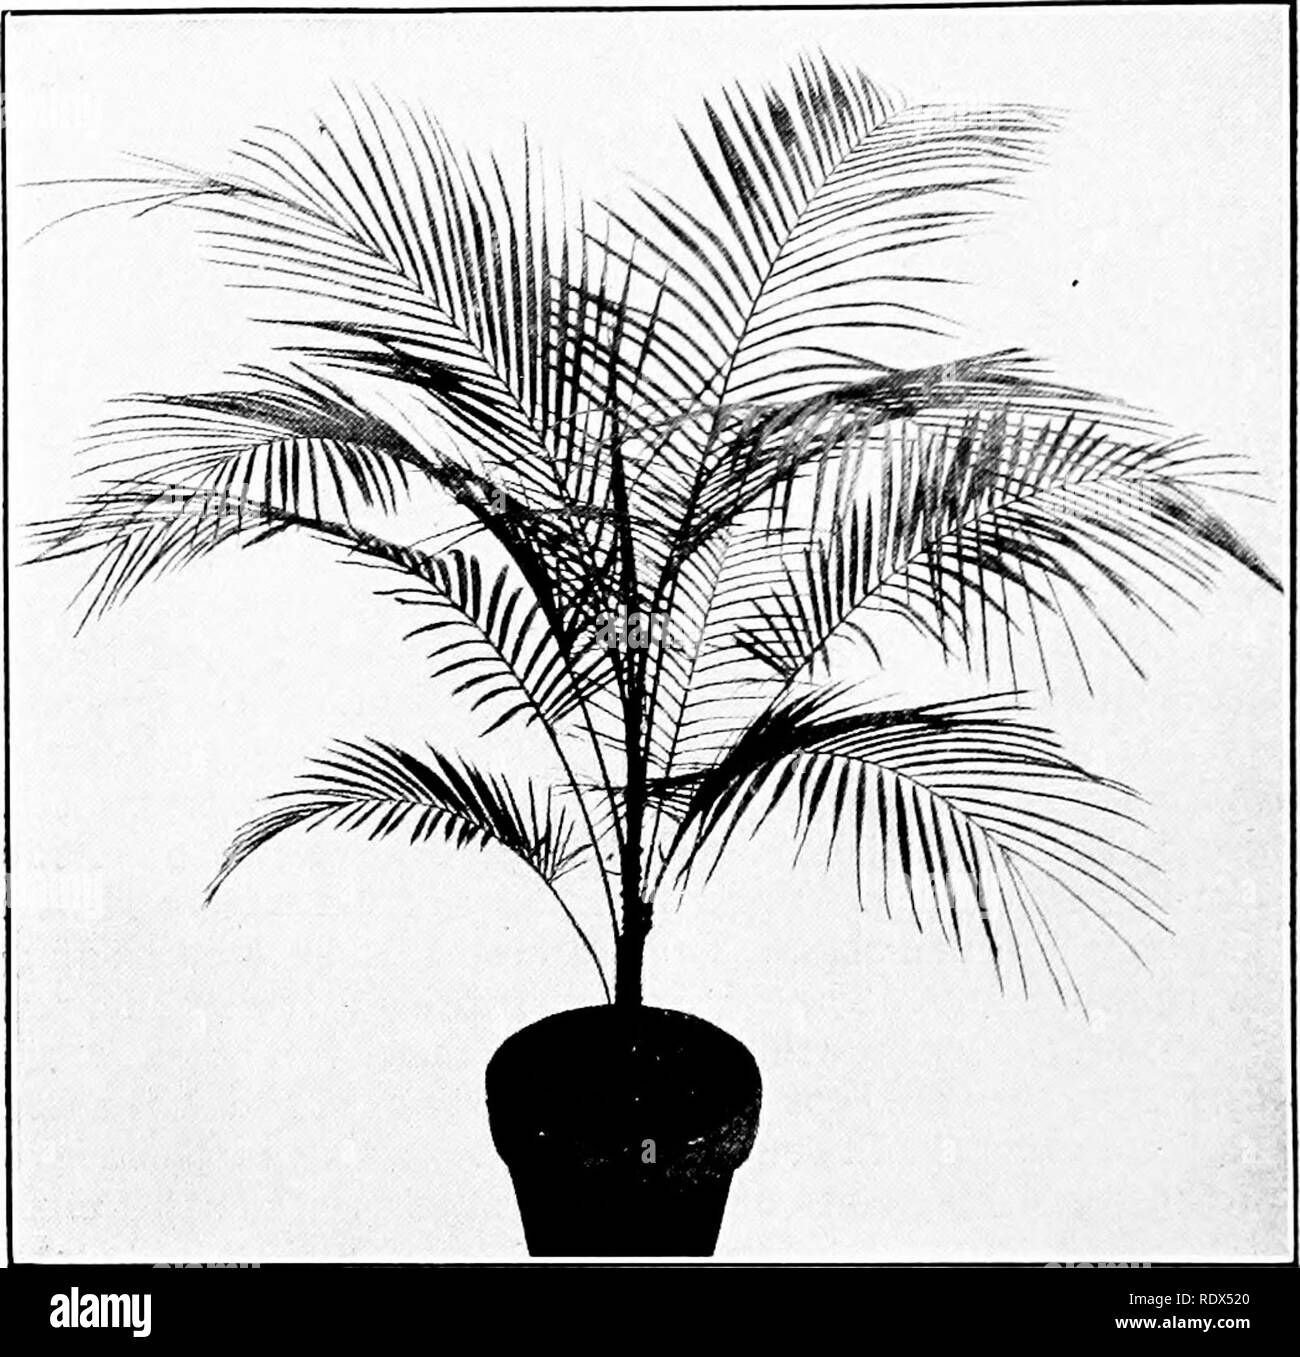 . Plant culture; a working handbook of every day practice for all who grow flowering and ornamental plants in the garden and greenhouse. Gardening; Greenhouses. 142 PLANT CULTURE. Cocos Weddelliana COURTESY HENRY A. DREER, INC., PHILADELPHIA, PA. Stand rough usage, to a certain extent, without showing bad effects. Palms may be divided into two sections—those with pinnate or feathered leaves and those with palmate or fan-shaped leaves. Latania, Livistona, Chamasrops, Rhapis, Corypha, Licuala and Thrinax are familiar examples of the section having fan-shaped leaves; while the feather-leaved sect Stock Photo